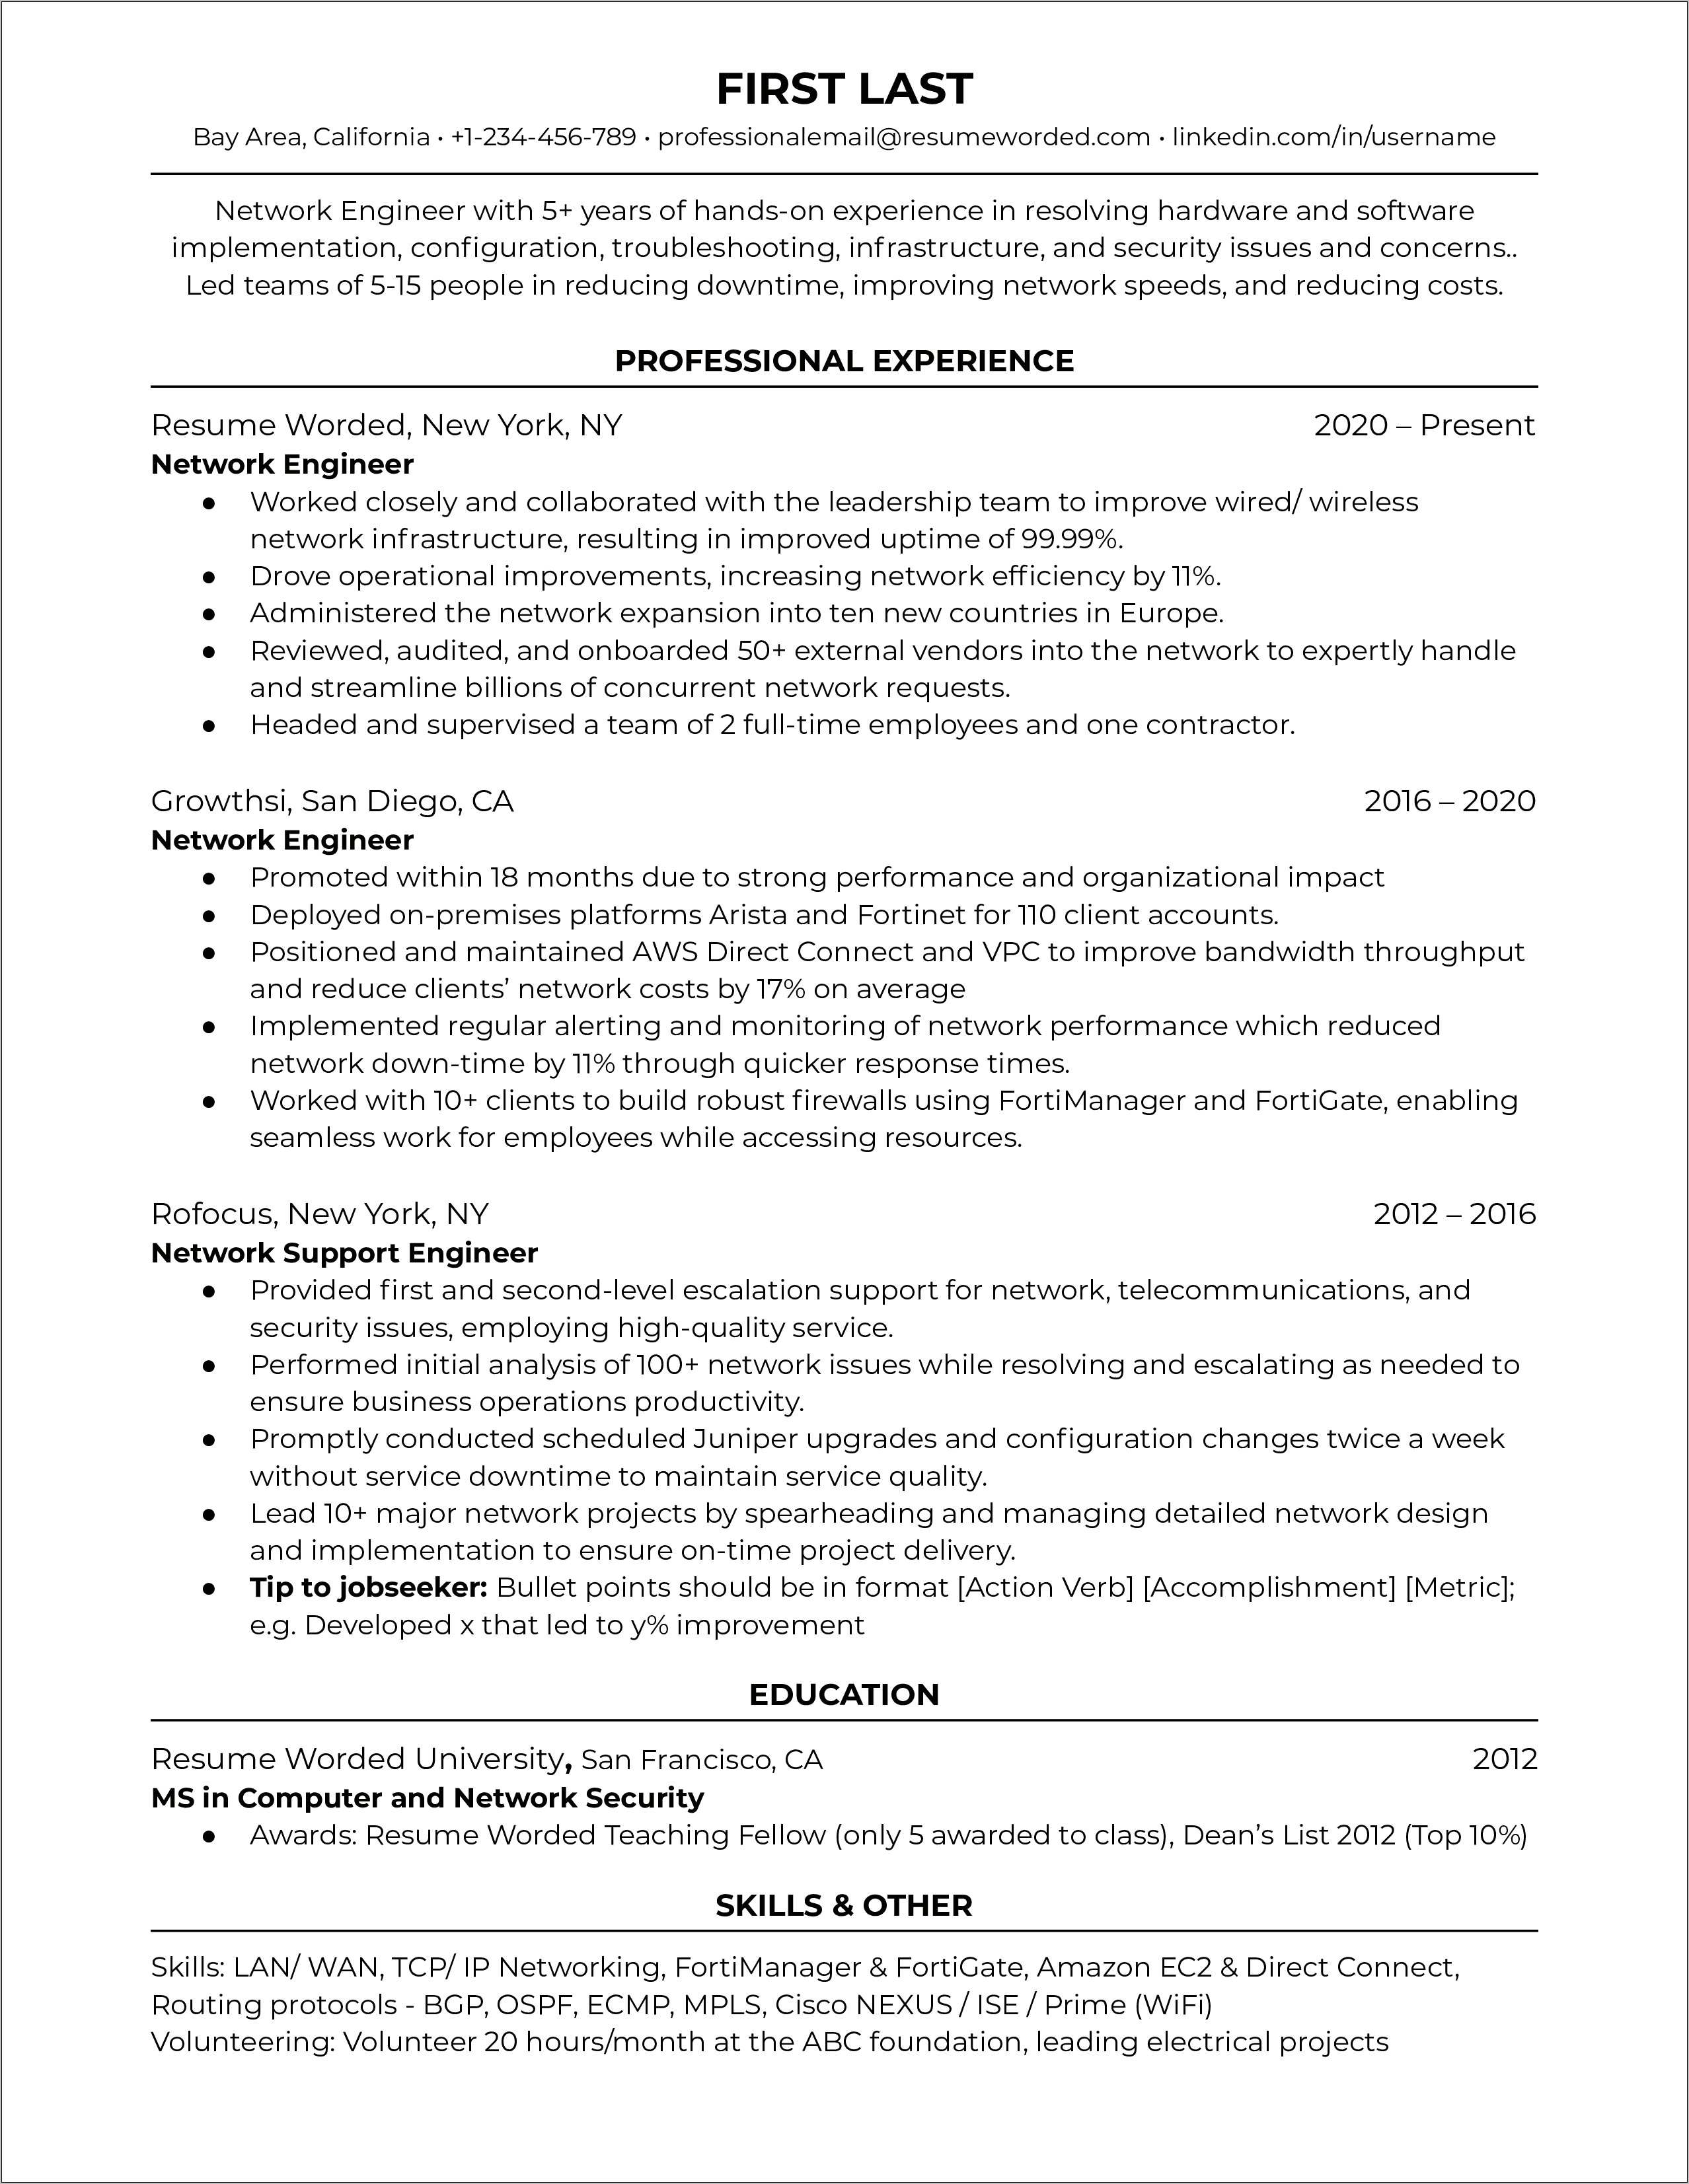 Resume Objective For Network Position